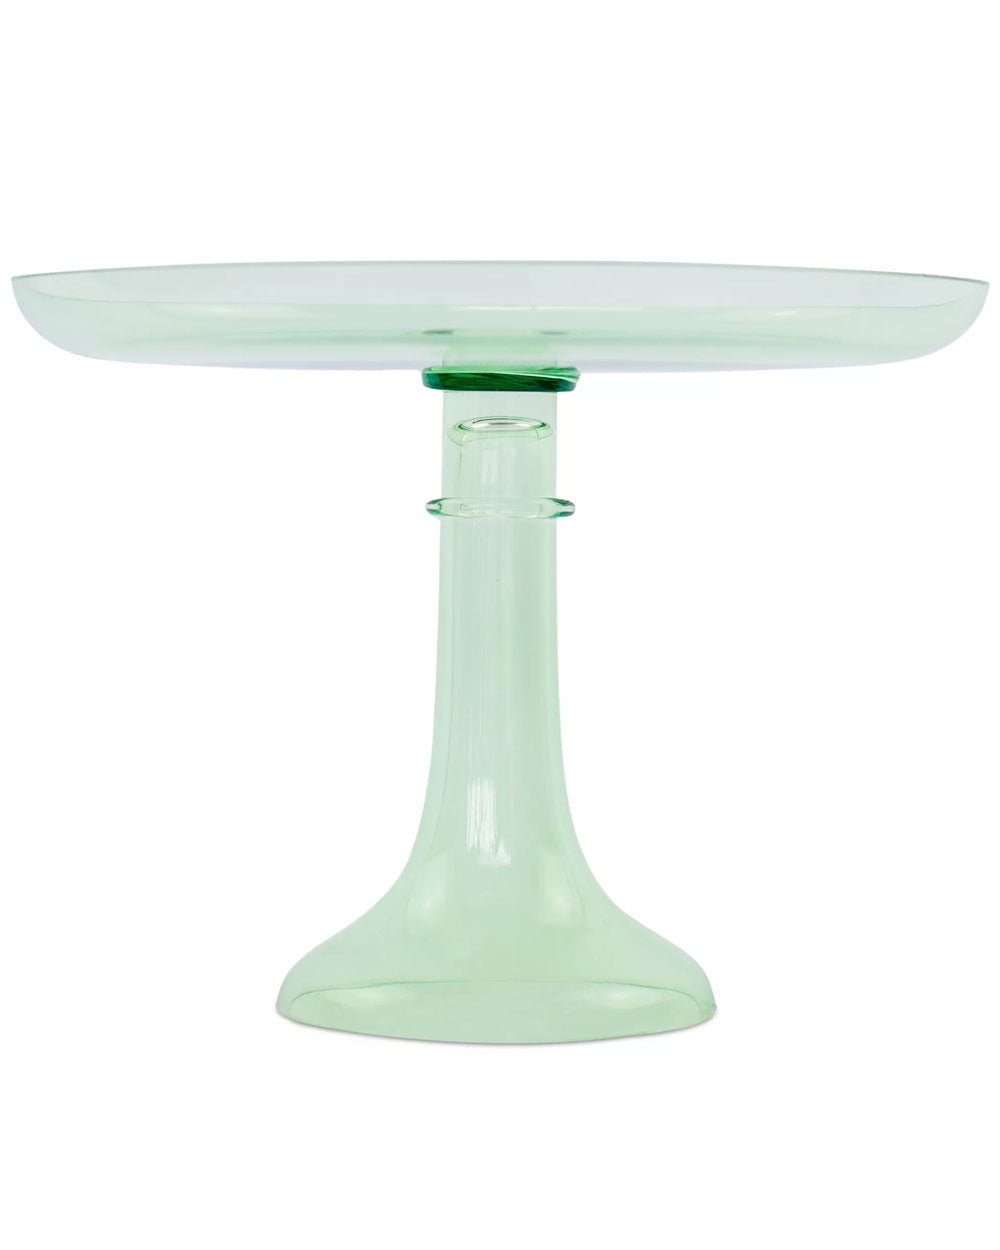 Mint Green Colored Glass Cake Stand